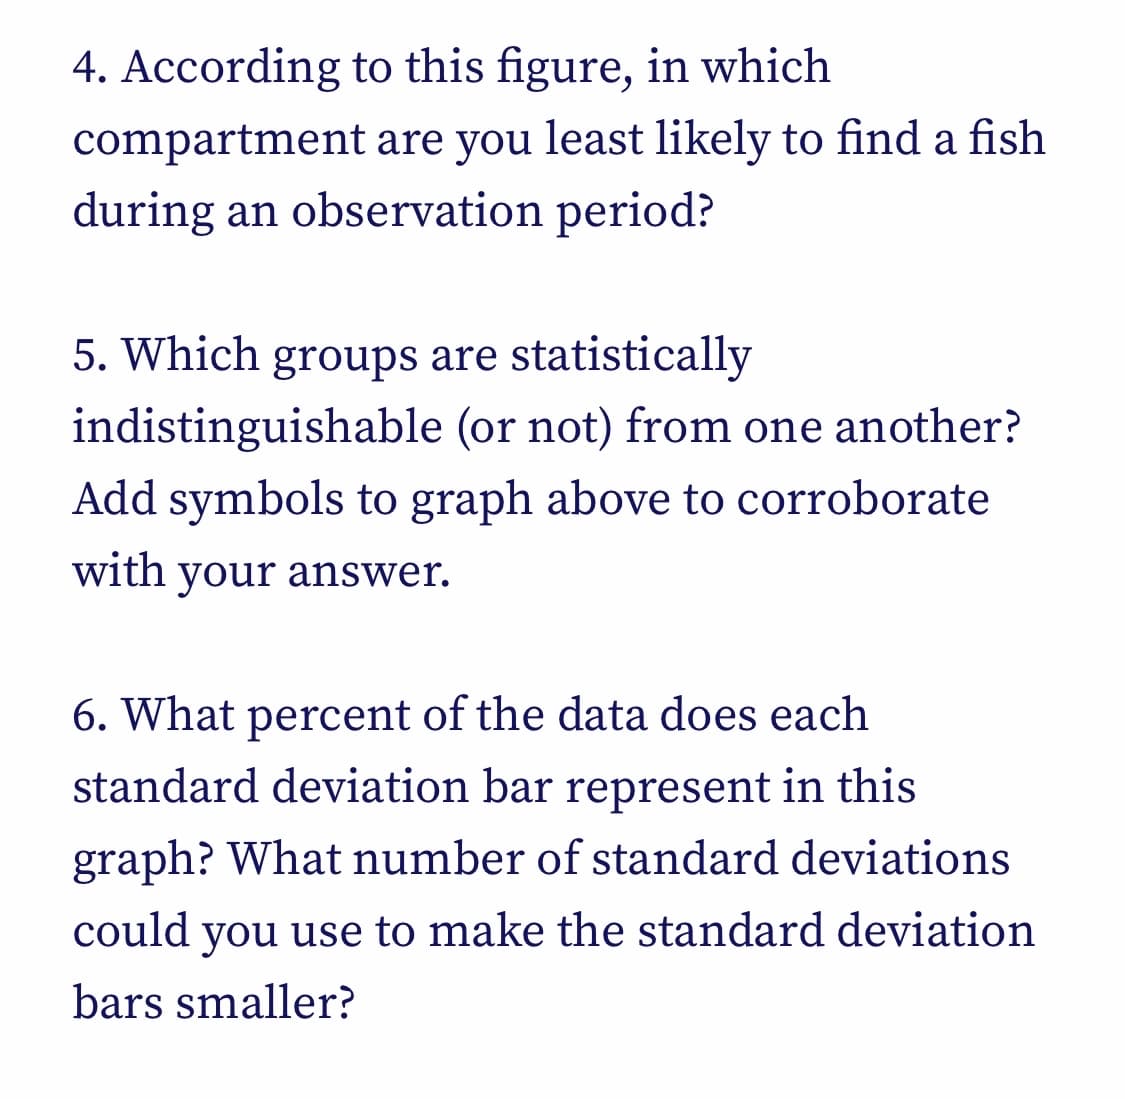 4. According to this figure, in which
compartment are you least likely to find a fish
during an observation period?
5. Which groups are statistically
indistinguishable
(or not) from one another?
Add symbols to graph above to corroborate
with your answer.
6. What percent of the data does each
standard deviation bar represent in this
graph? What number of standard deviations
could you use to make the standard deviation
bars smaller?